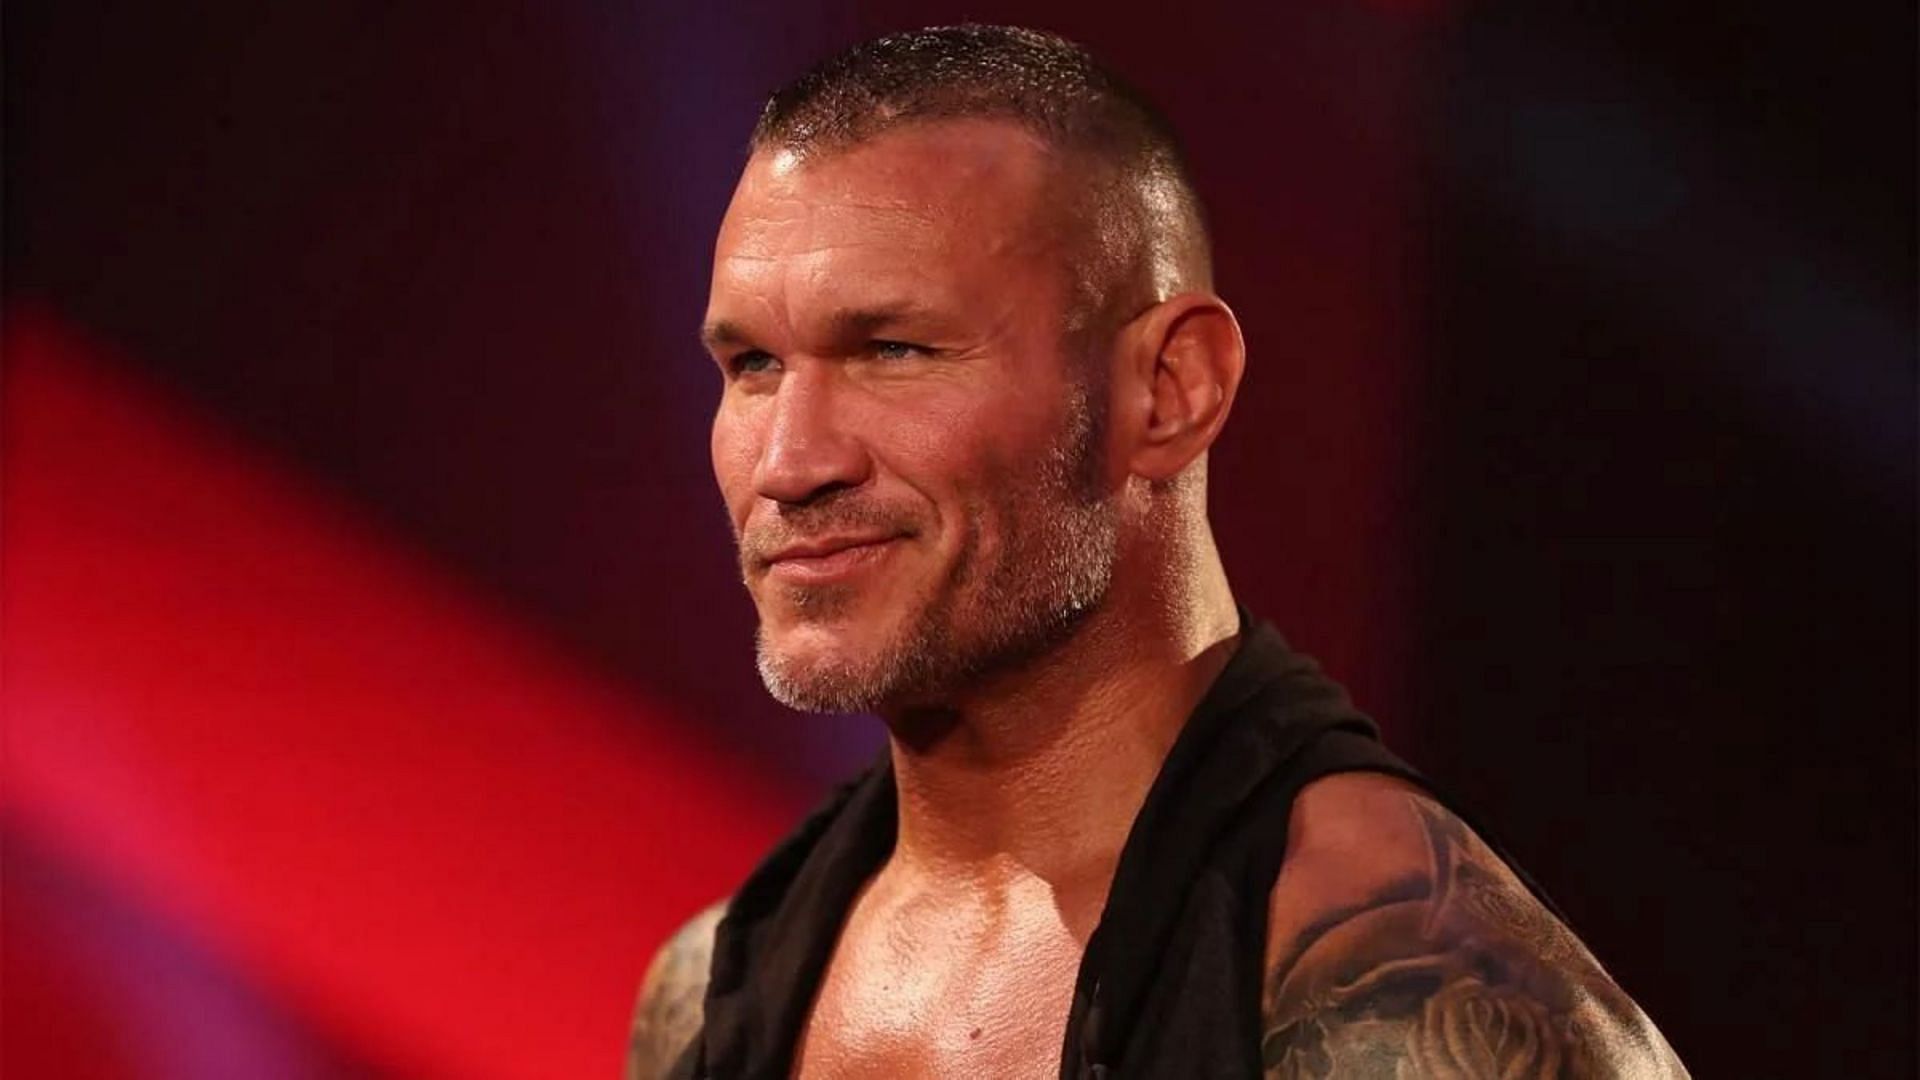 Randy Orton is currently out of action due to a back injury